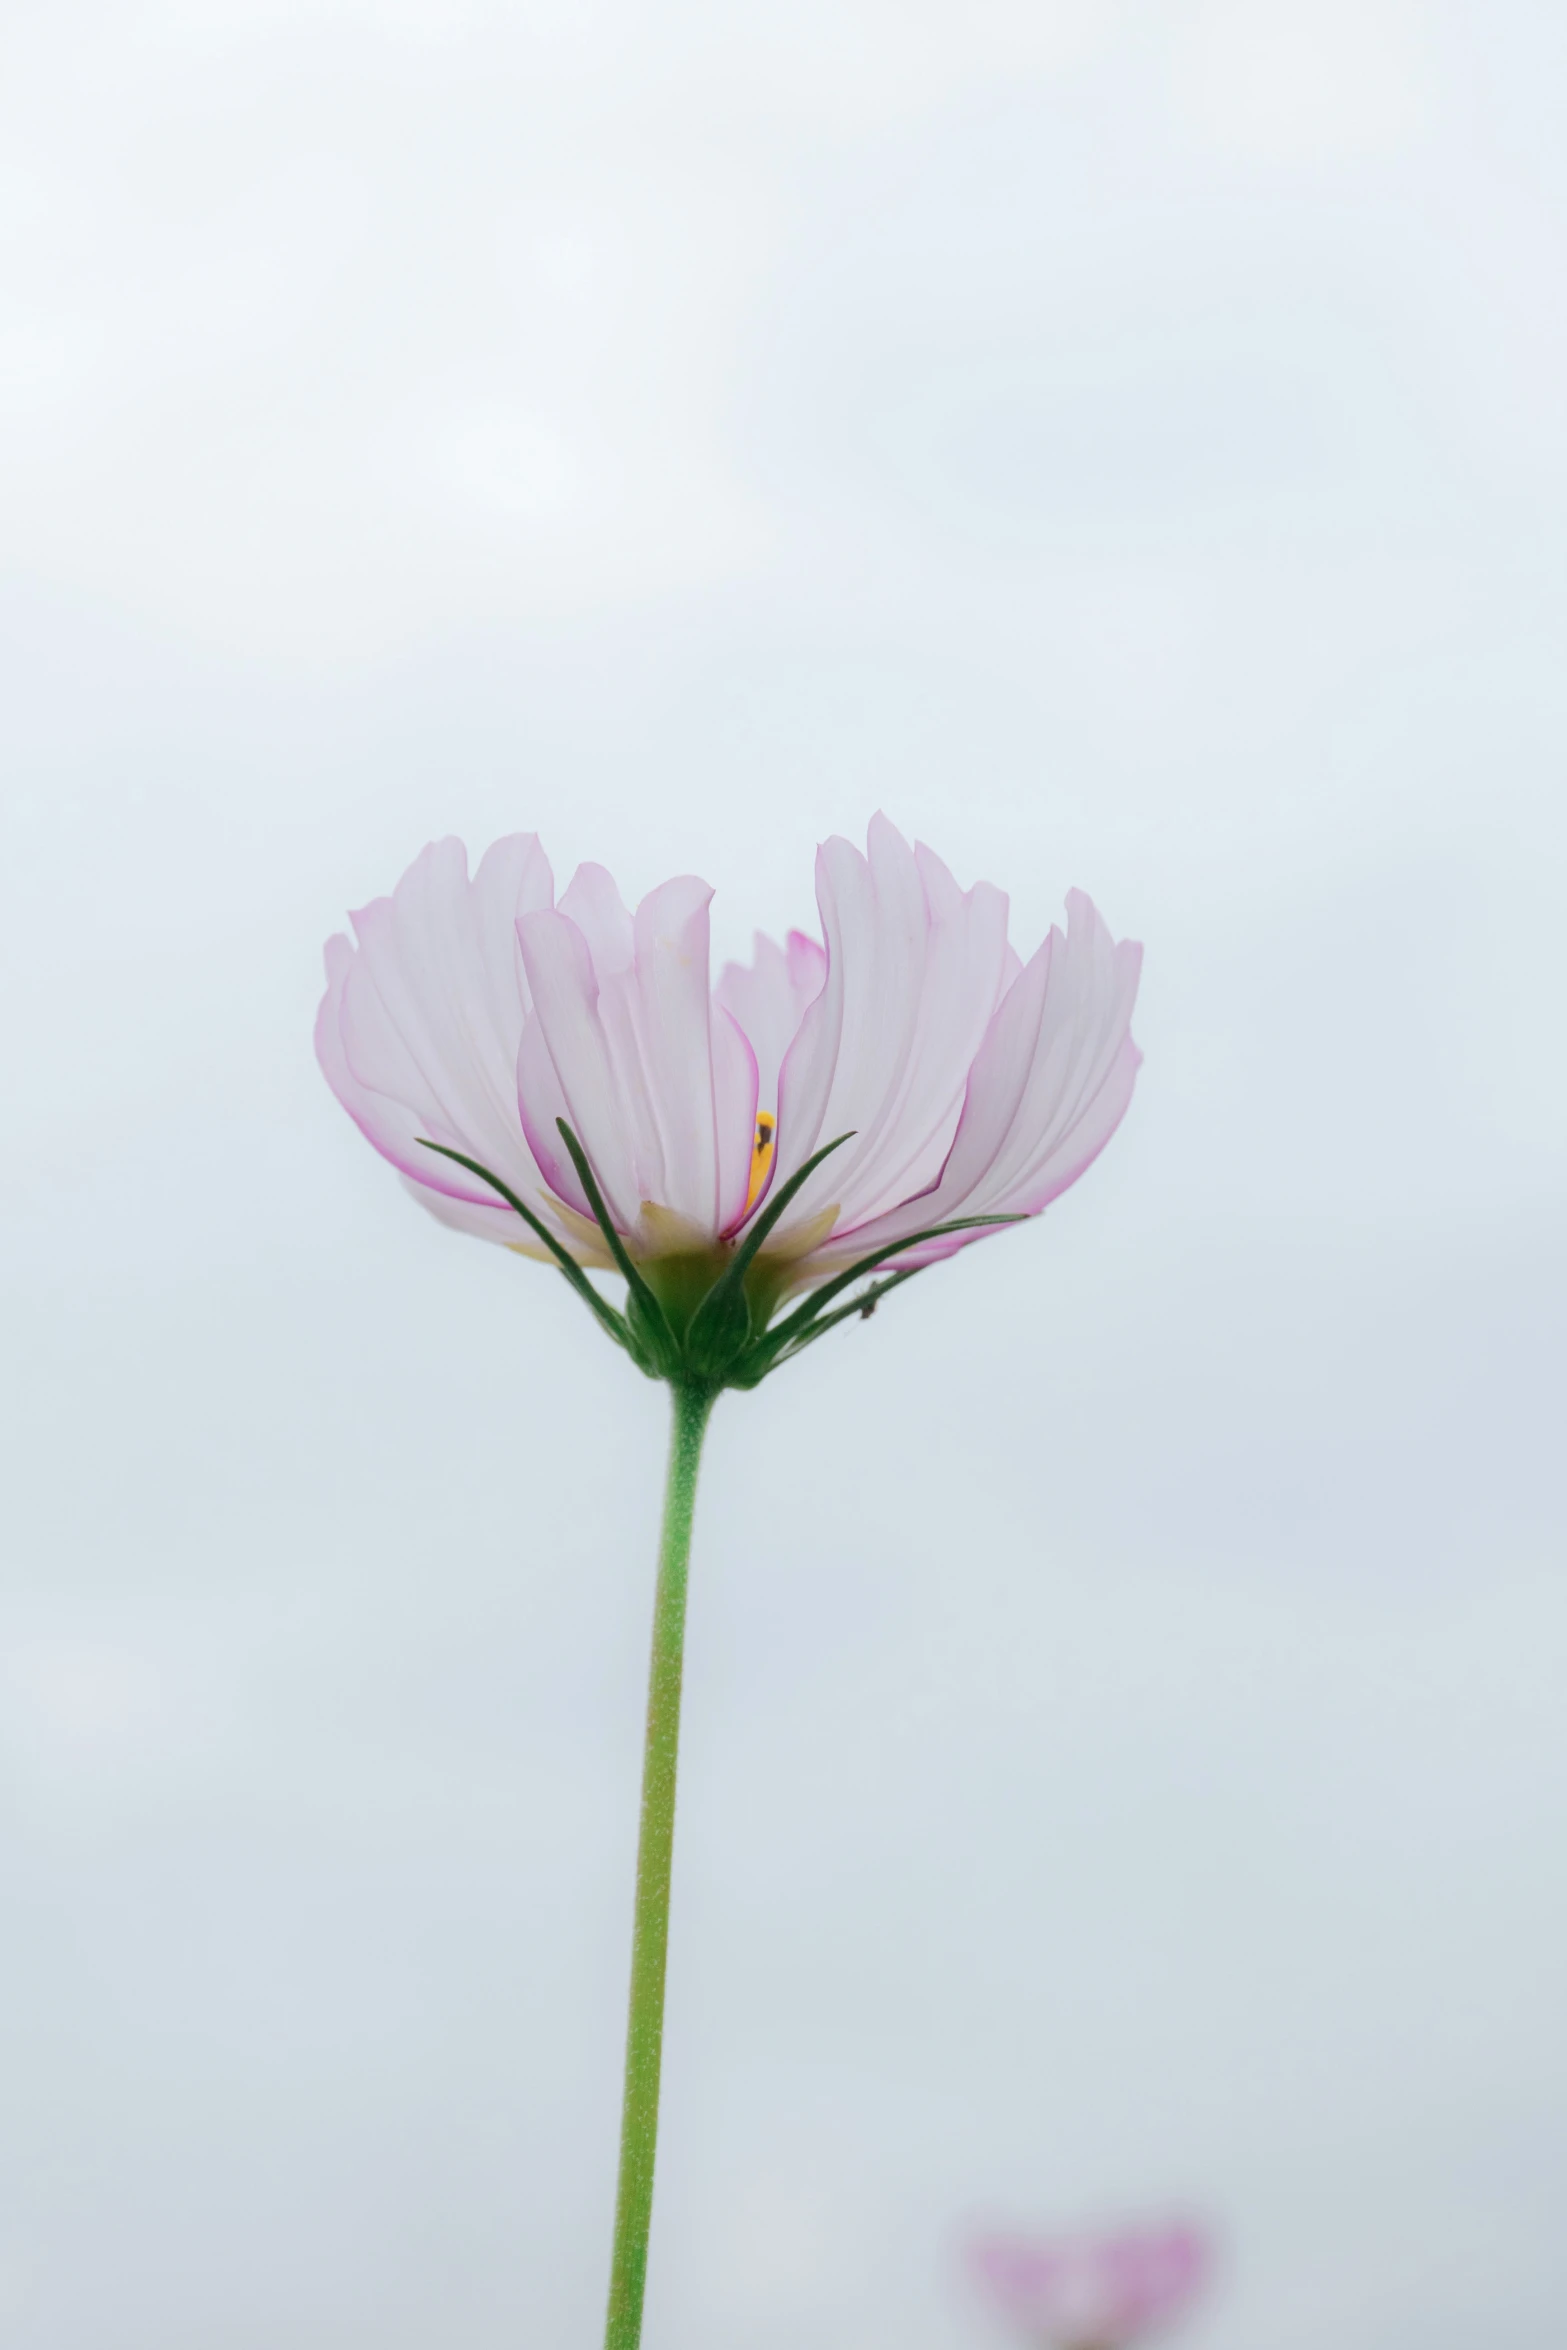 a single purple flower sitting next to a white flower